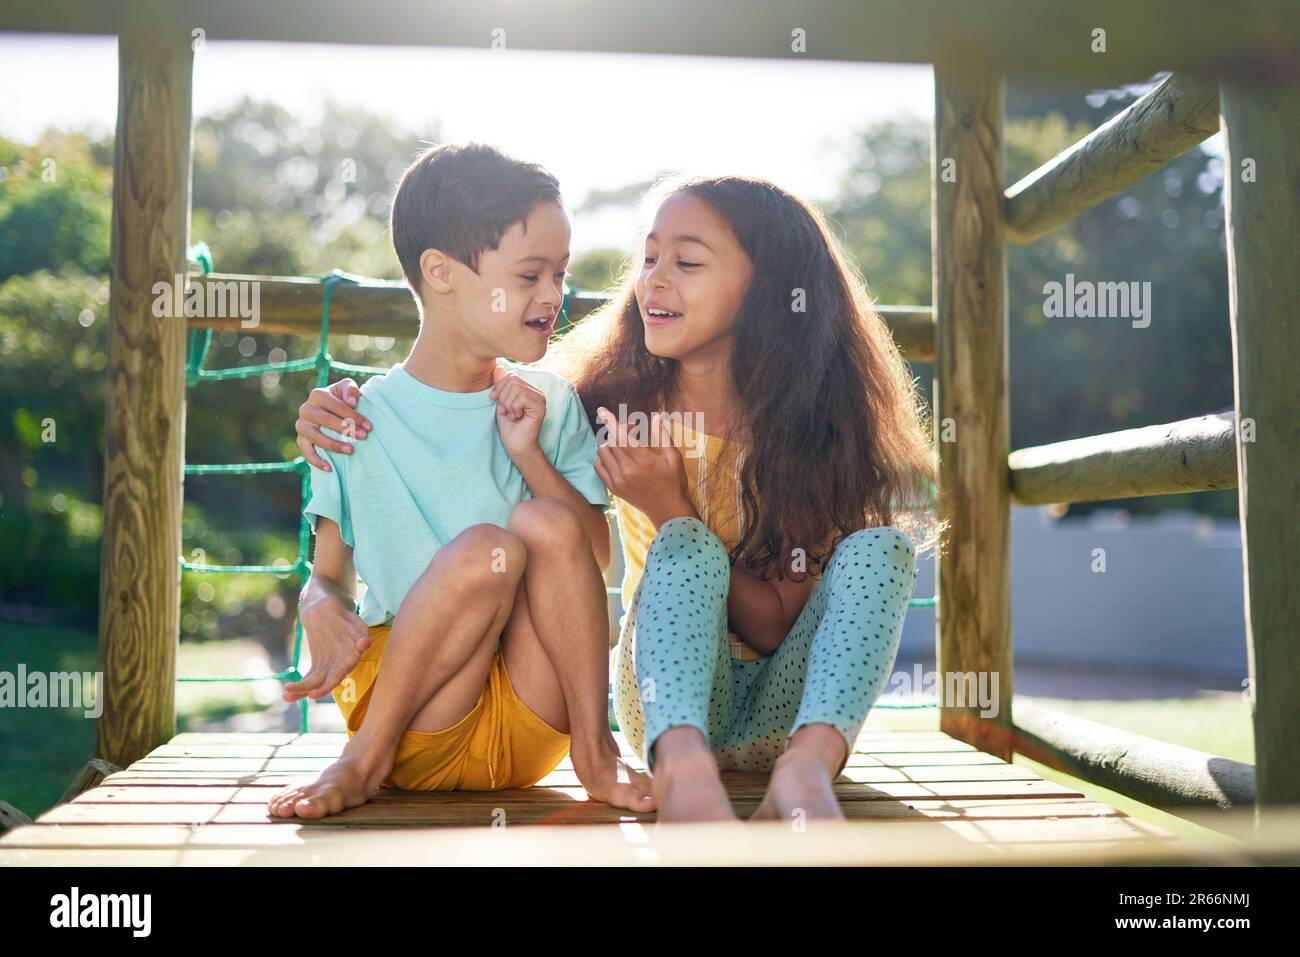 Sister hugging brother with Down Syndrome on playground equipment Stock Photo